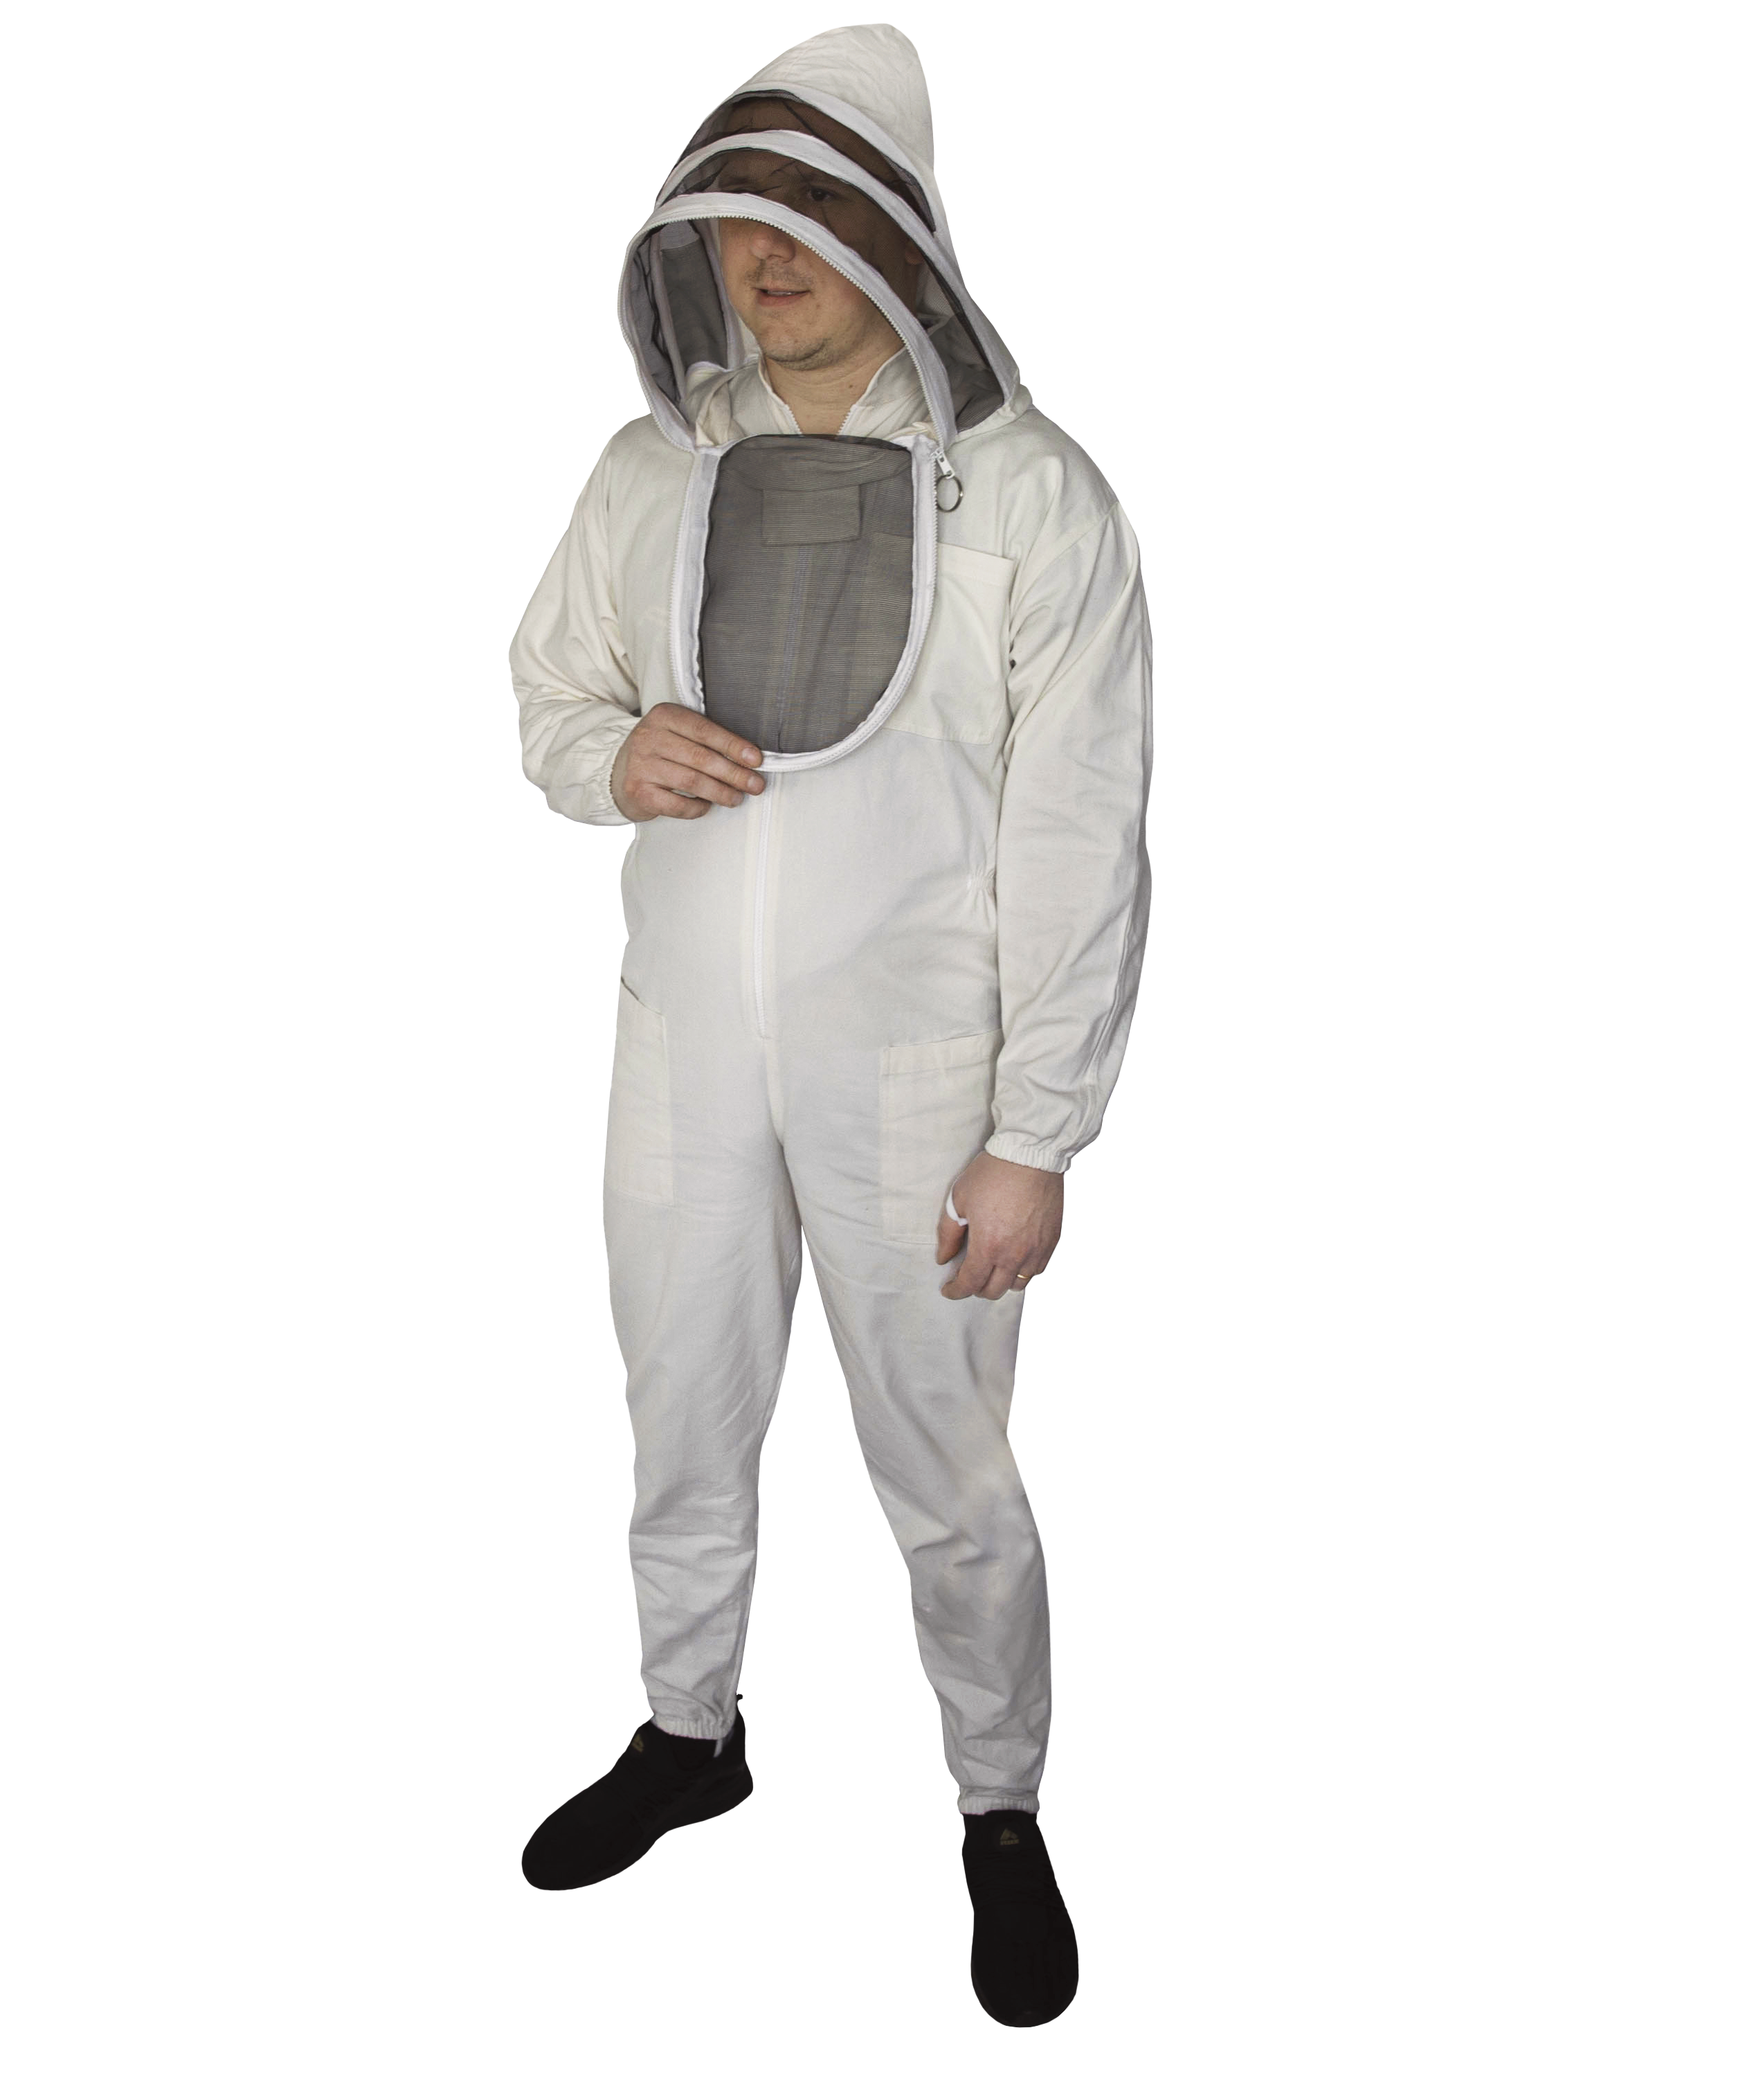 Beekeeping gear Unisex Professional White Cotton Full Body Bee Keeping Suit 